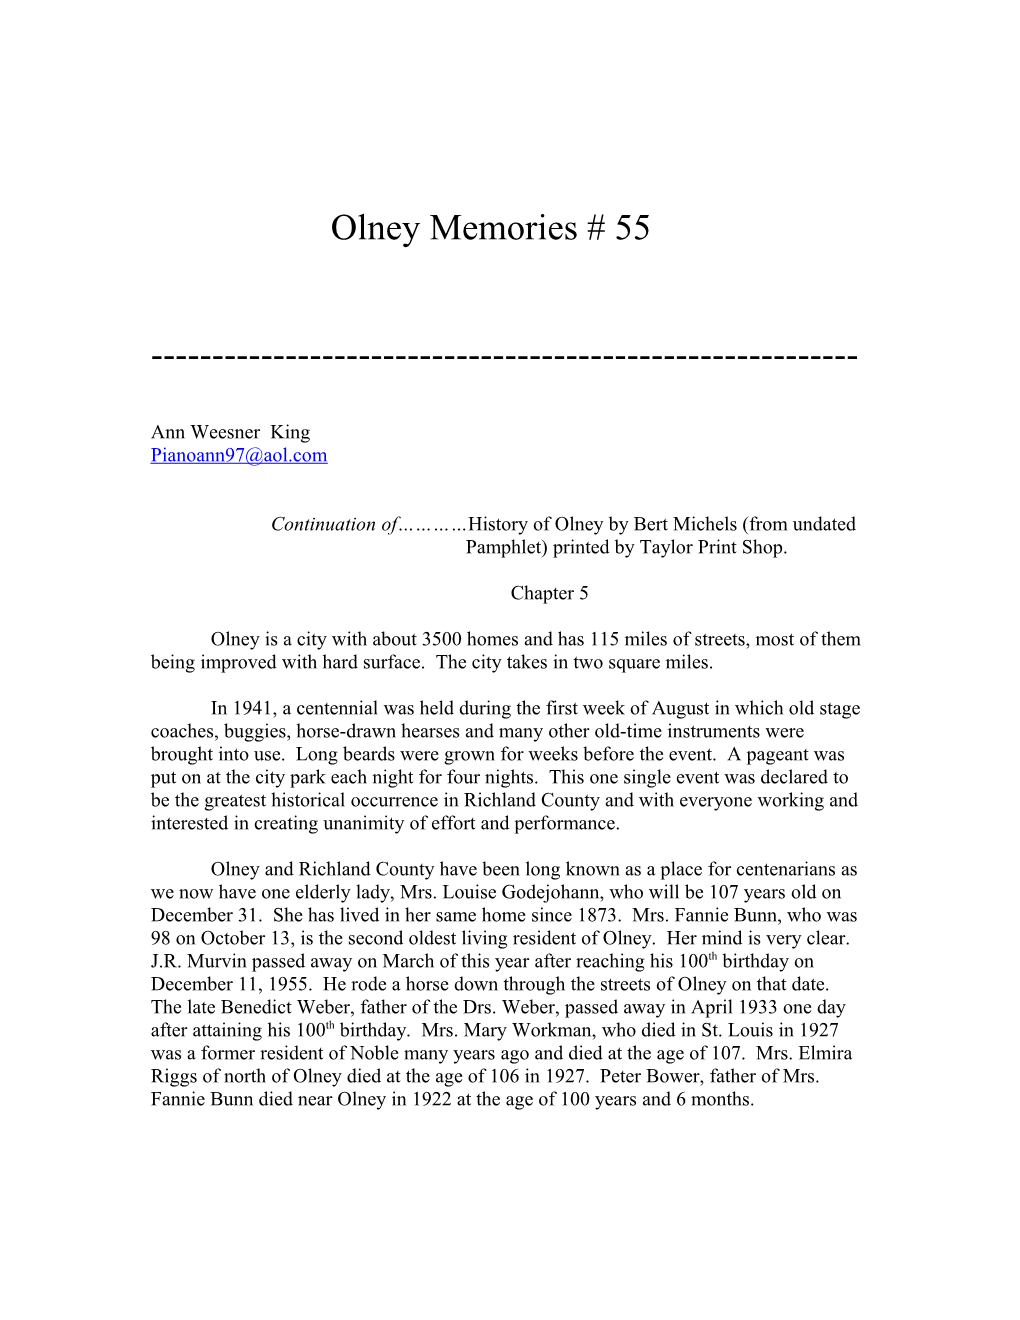 Continuation of History of Olney by Bert Michels (From Undated